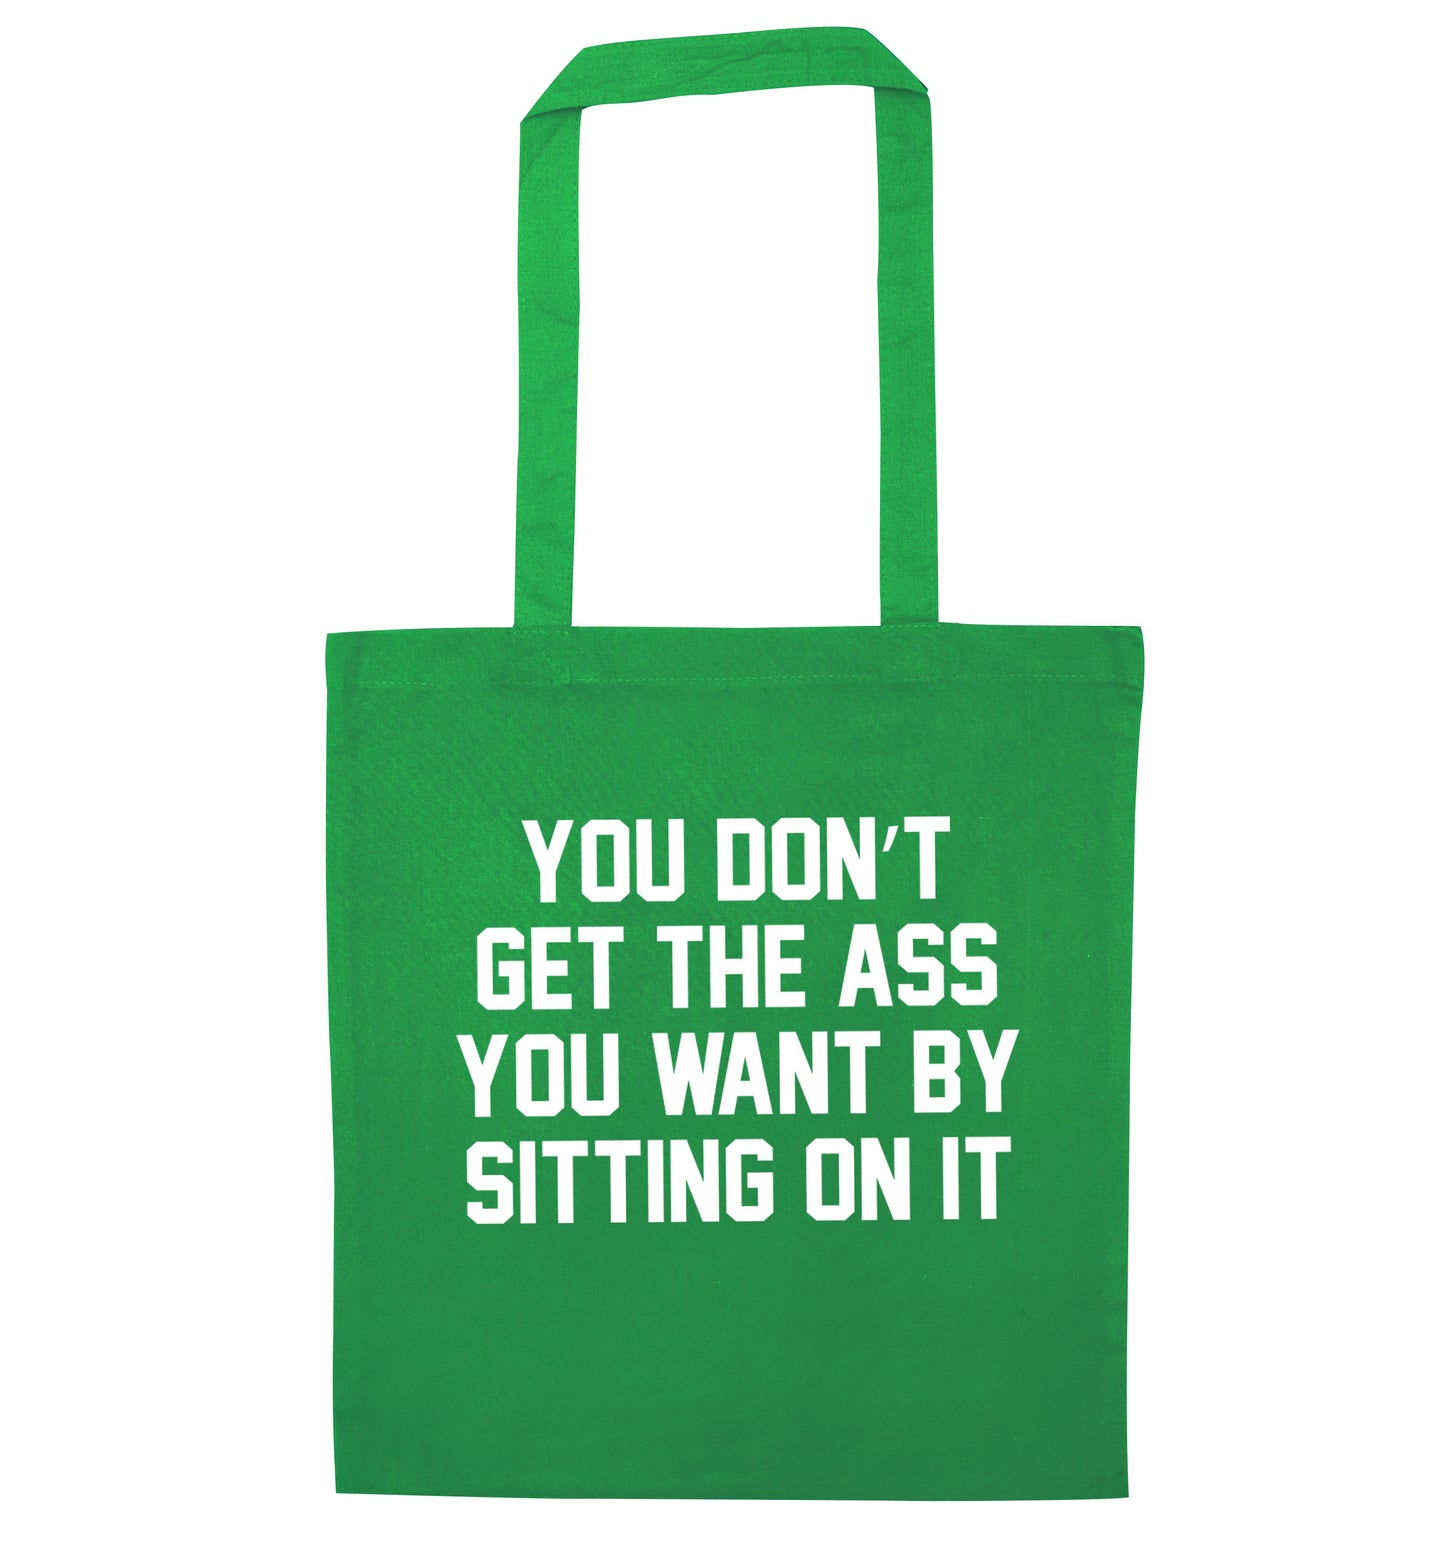 You don't get the ass you want by sitting on it green tote bag